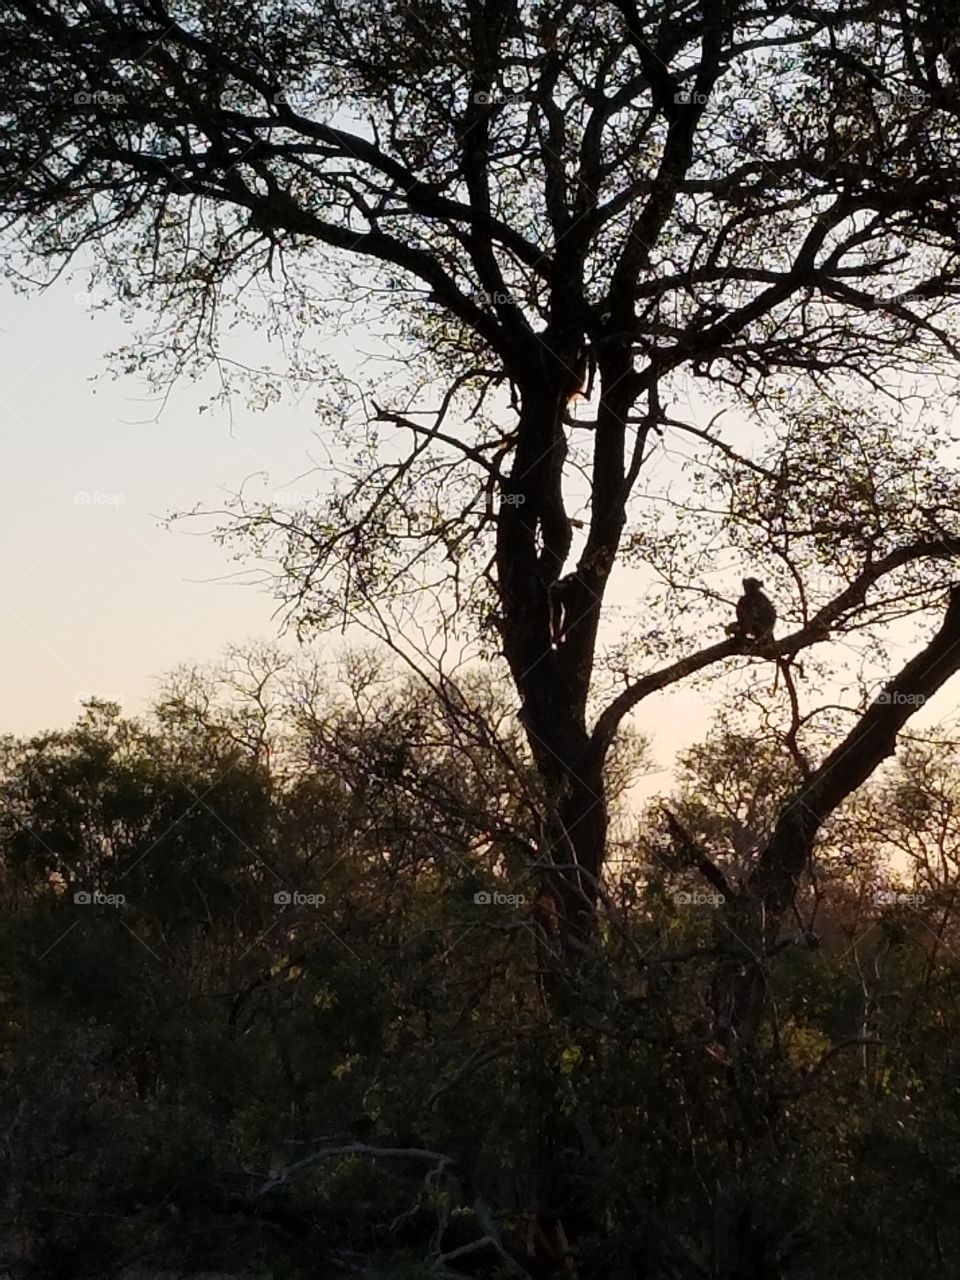 Baboon in a tree